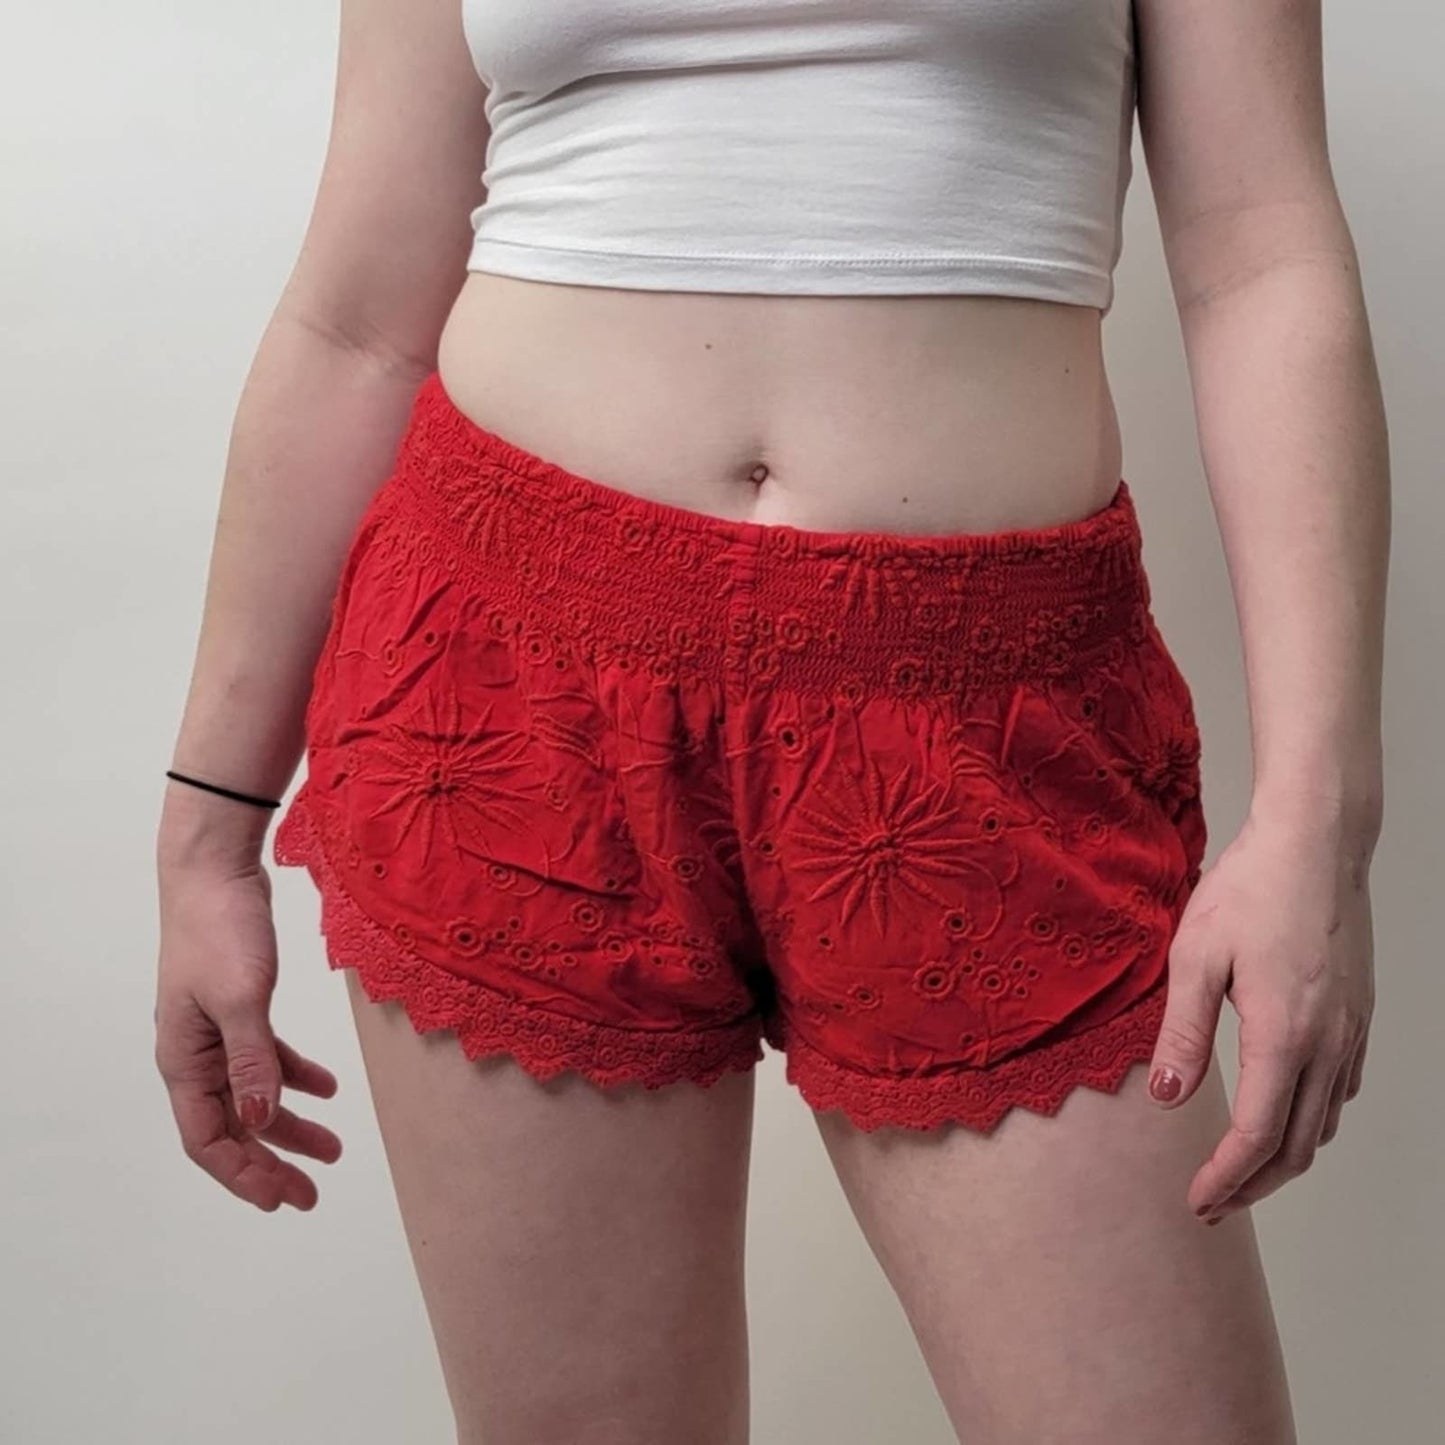 Forever 21 Lace Eyelet Pull On Red Cheeky Shorts - S